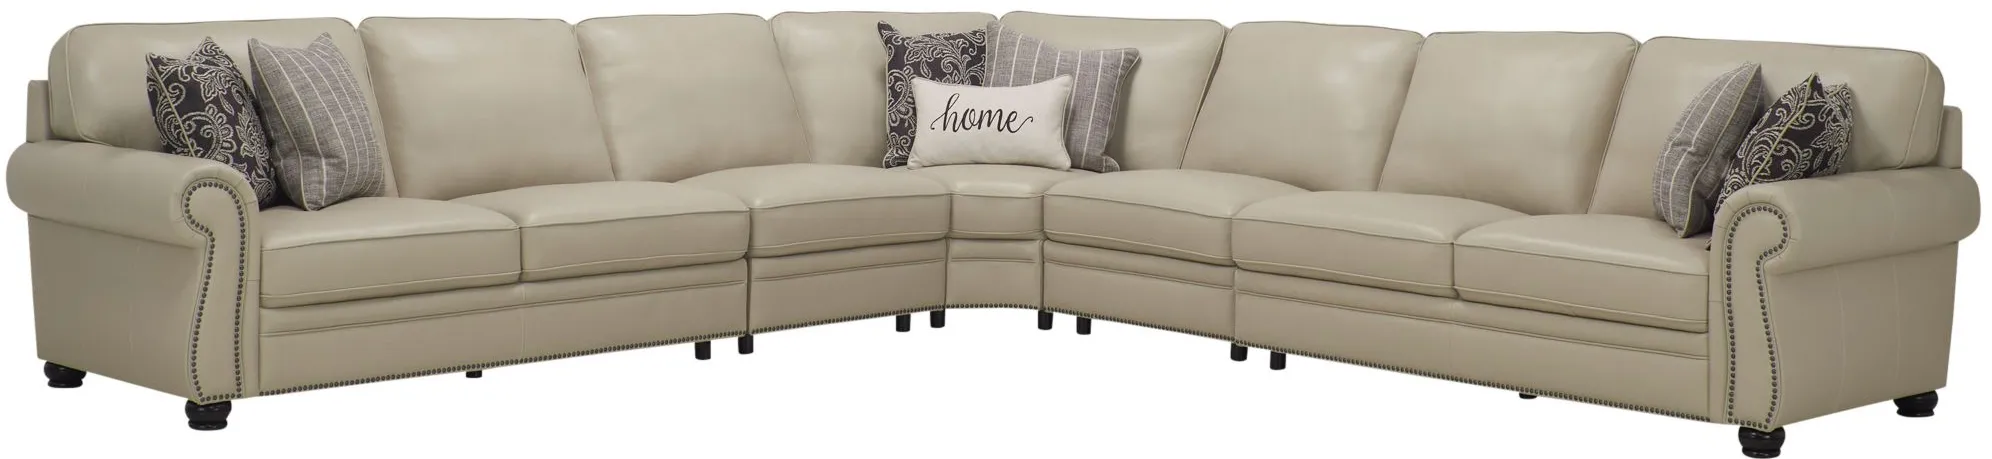 Gilmore 5-pc. Sectional in Off-White by Bellanest